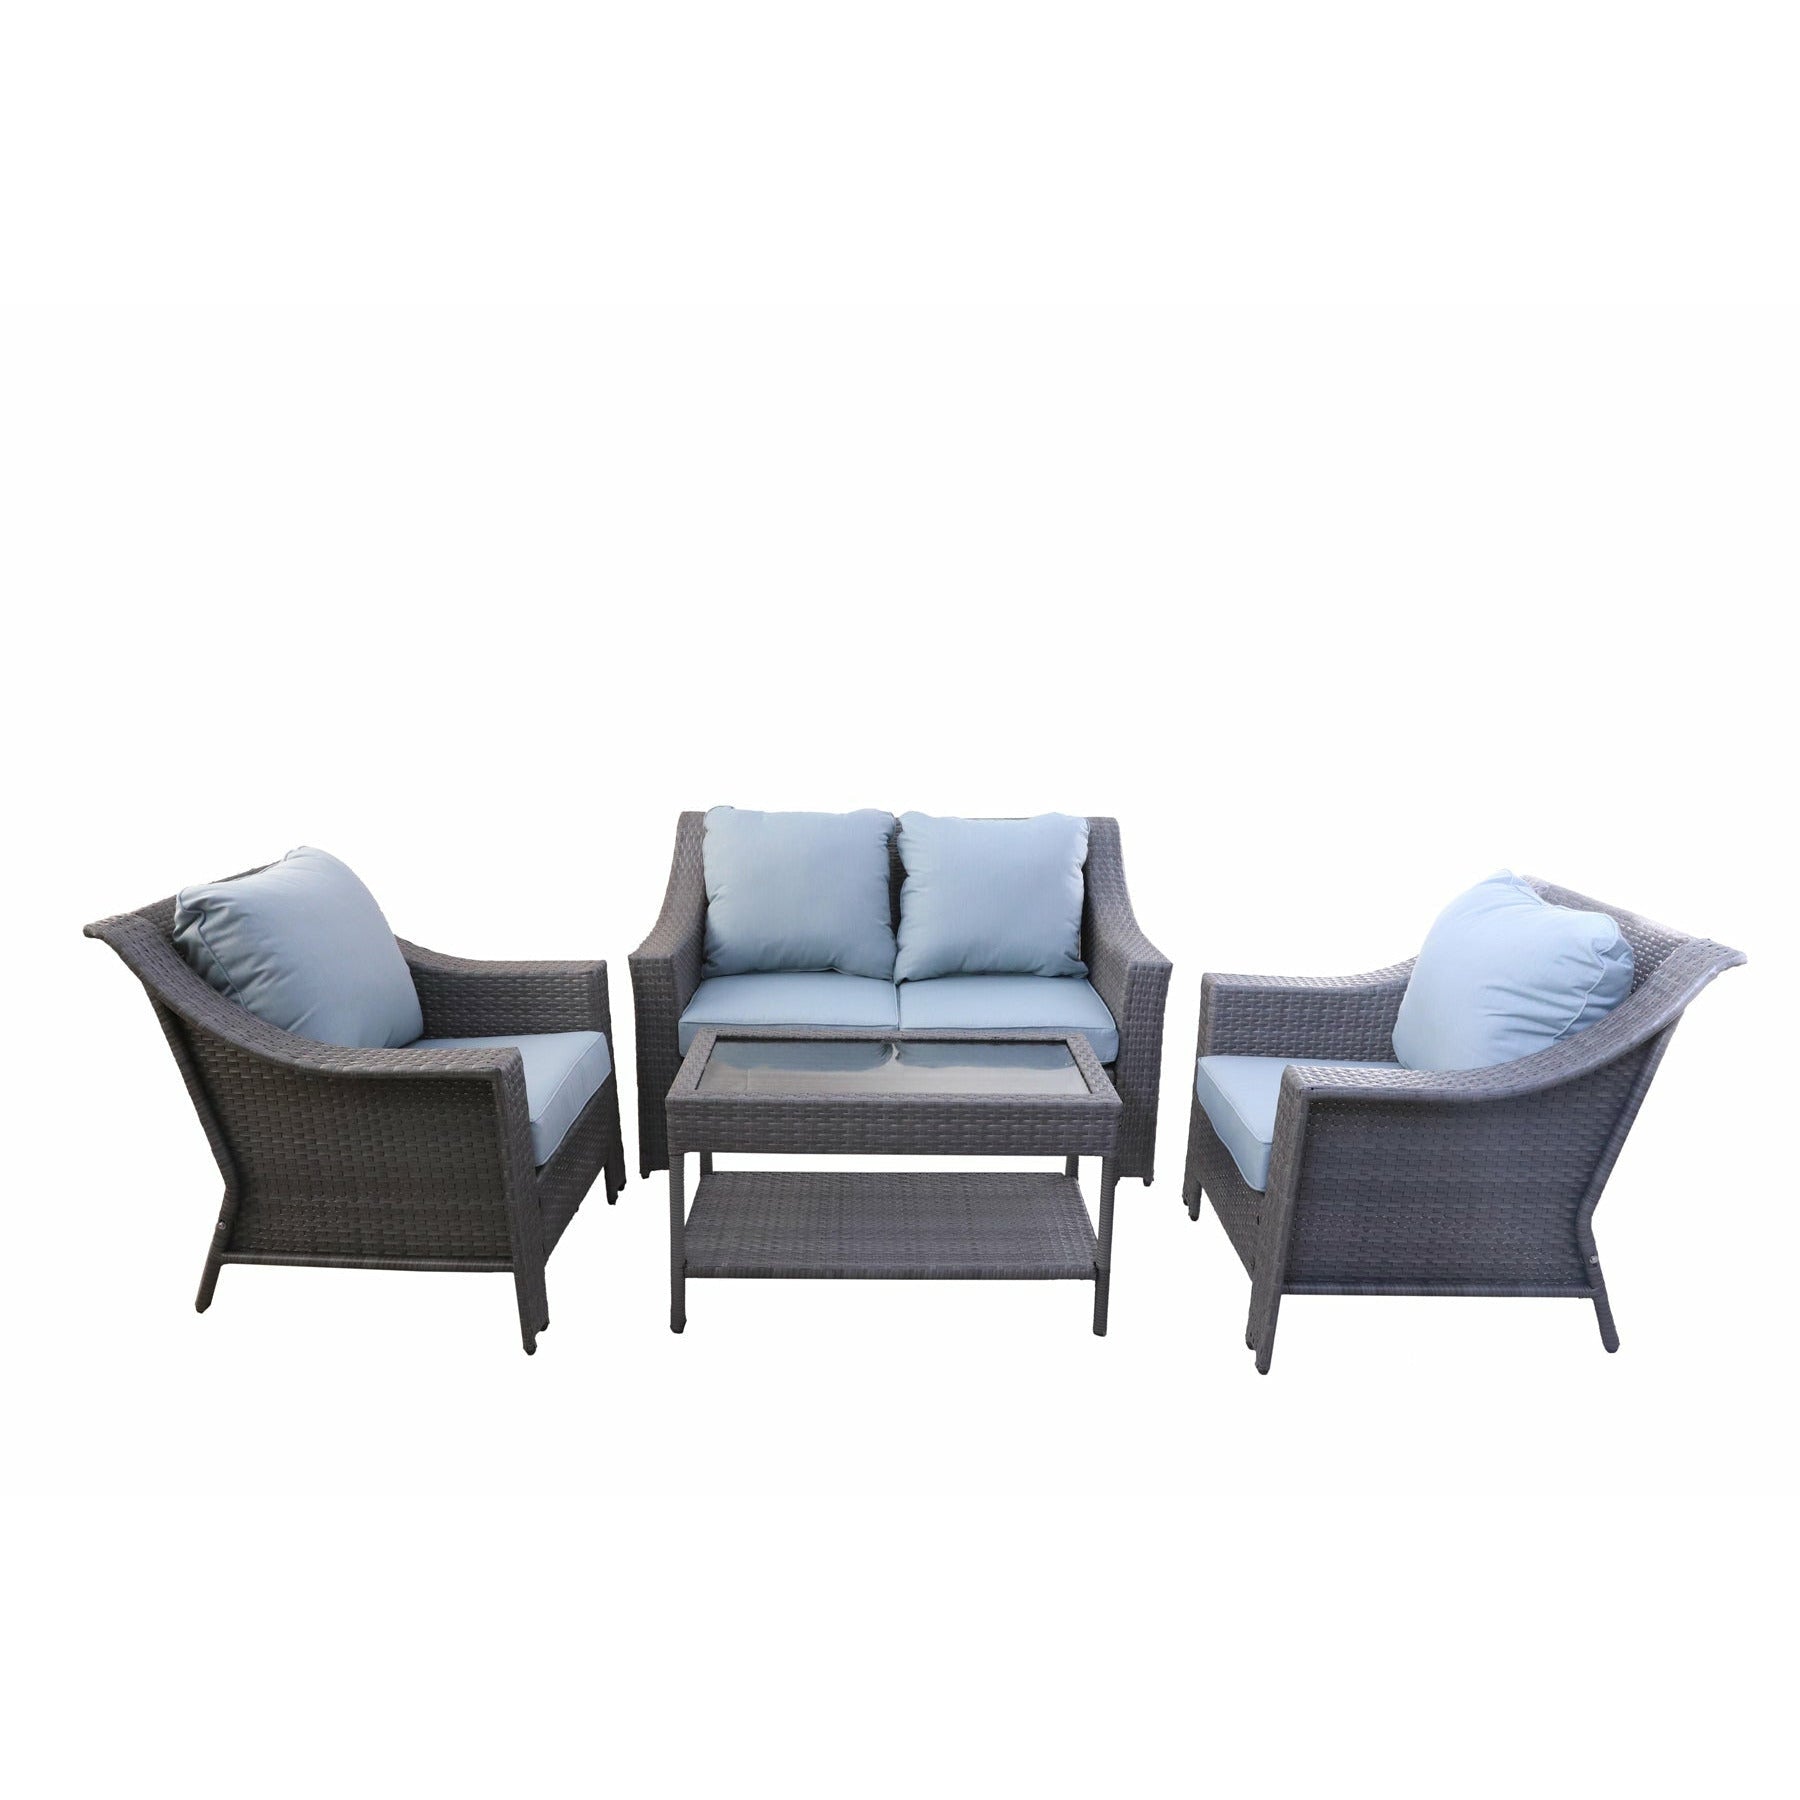 Resort Grey 4-Piece Outdoor Set by Gathercraft. A contemporary outdoor furniture ensemble featuring a loveseat, two club chairs, and a coffee table. The set showcases a sleek grey wicker design with plush blue cushions, creating a luxurious retreat ambiance. Versatile and stylish for any outdoor space.